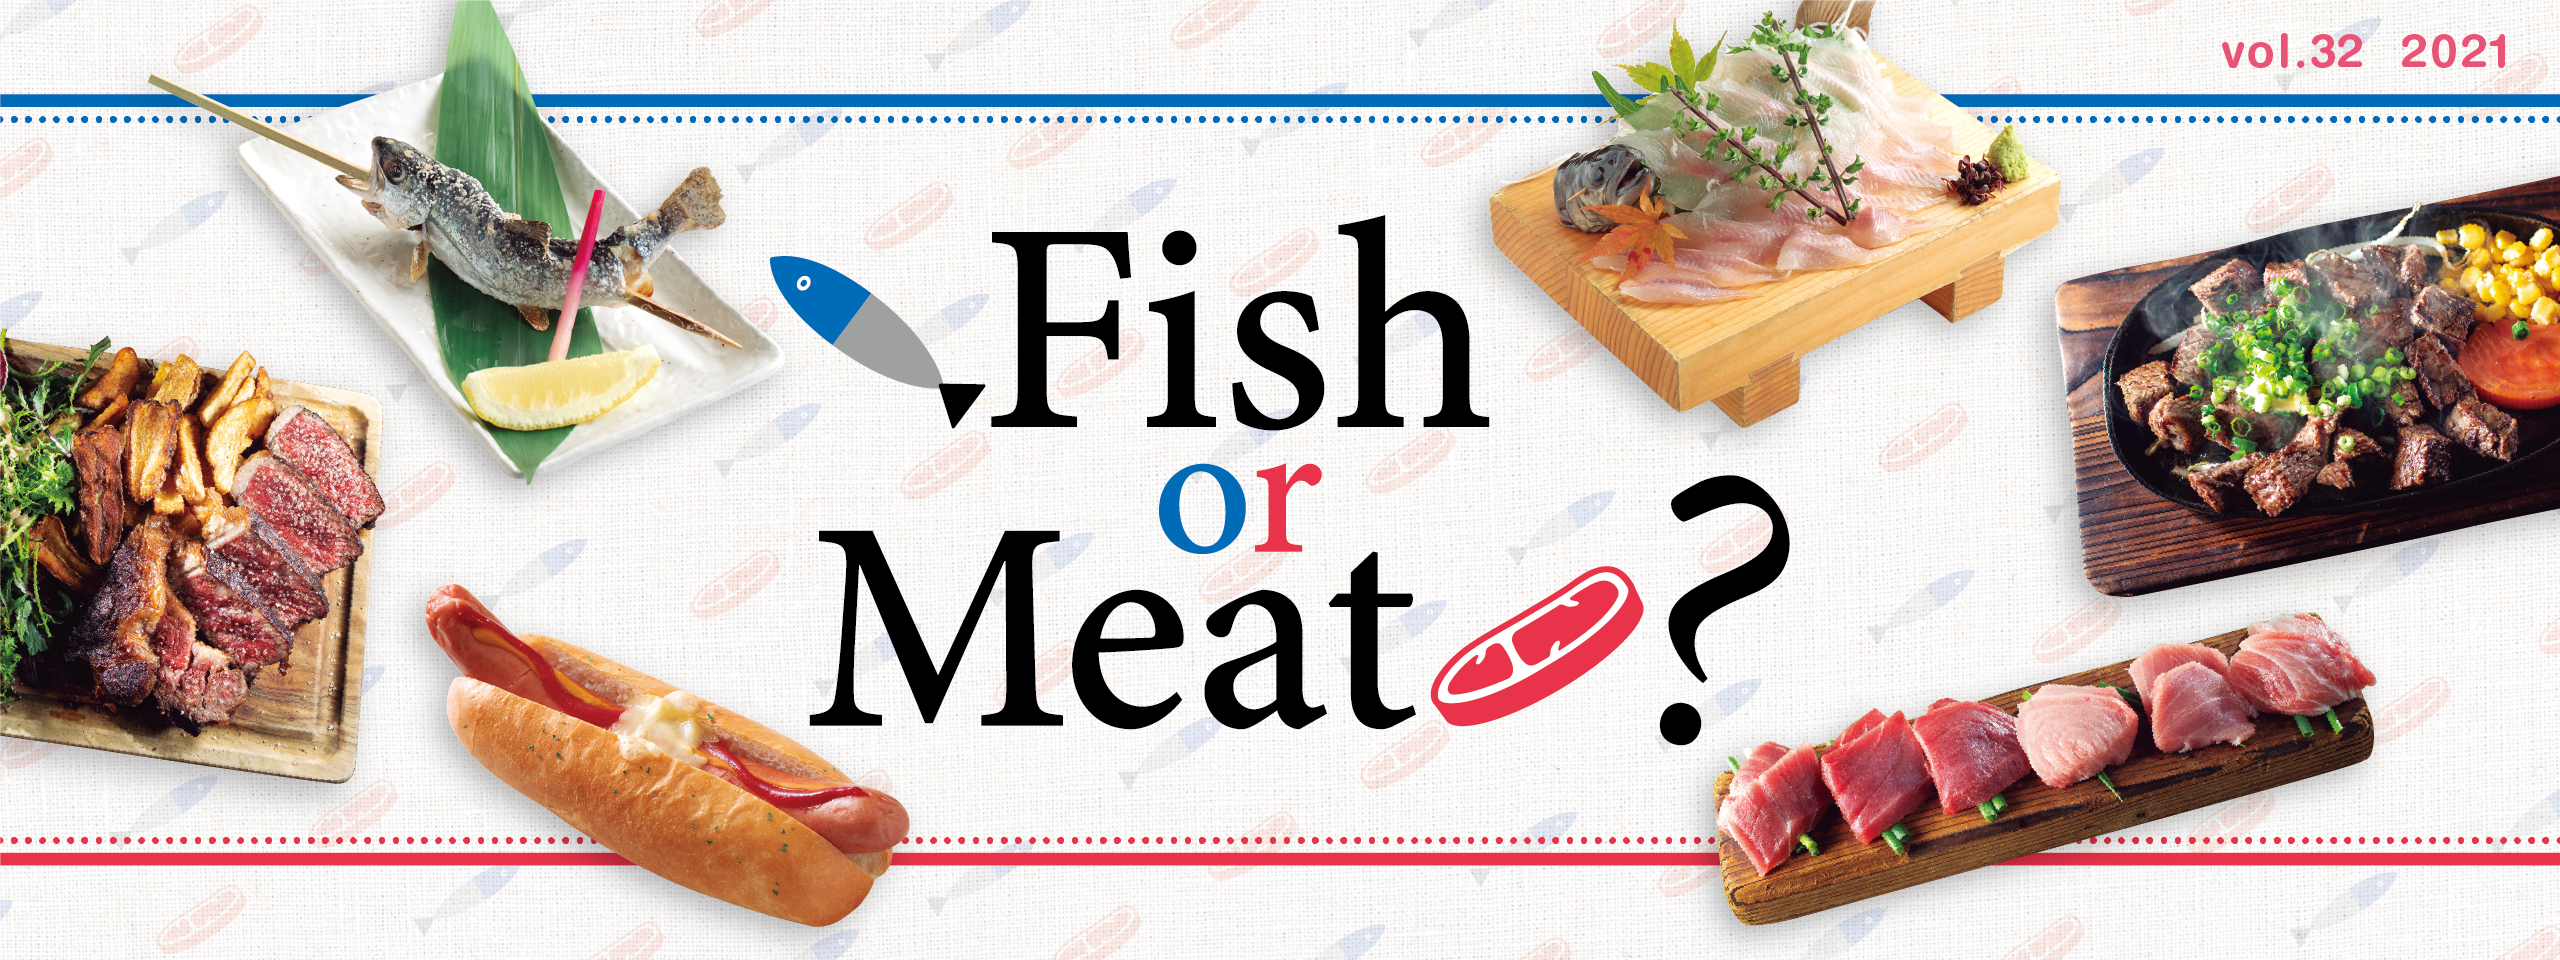 Fish or Meat?